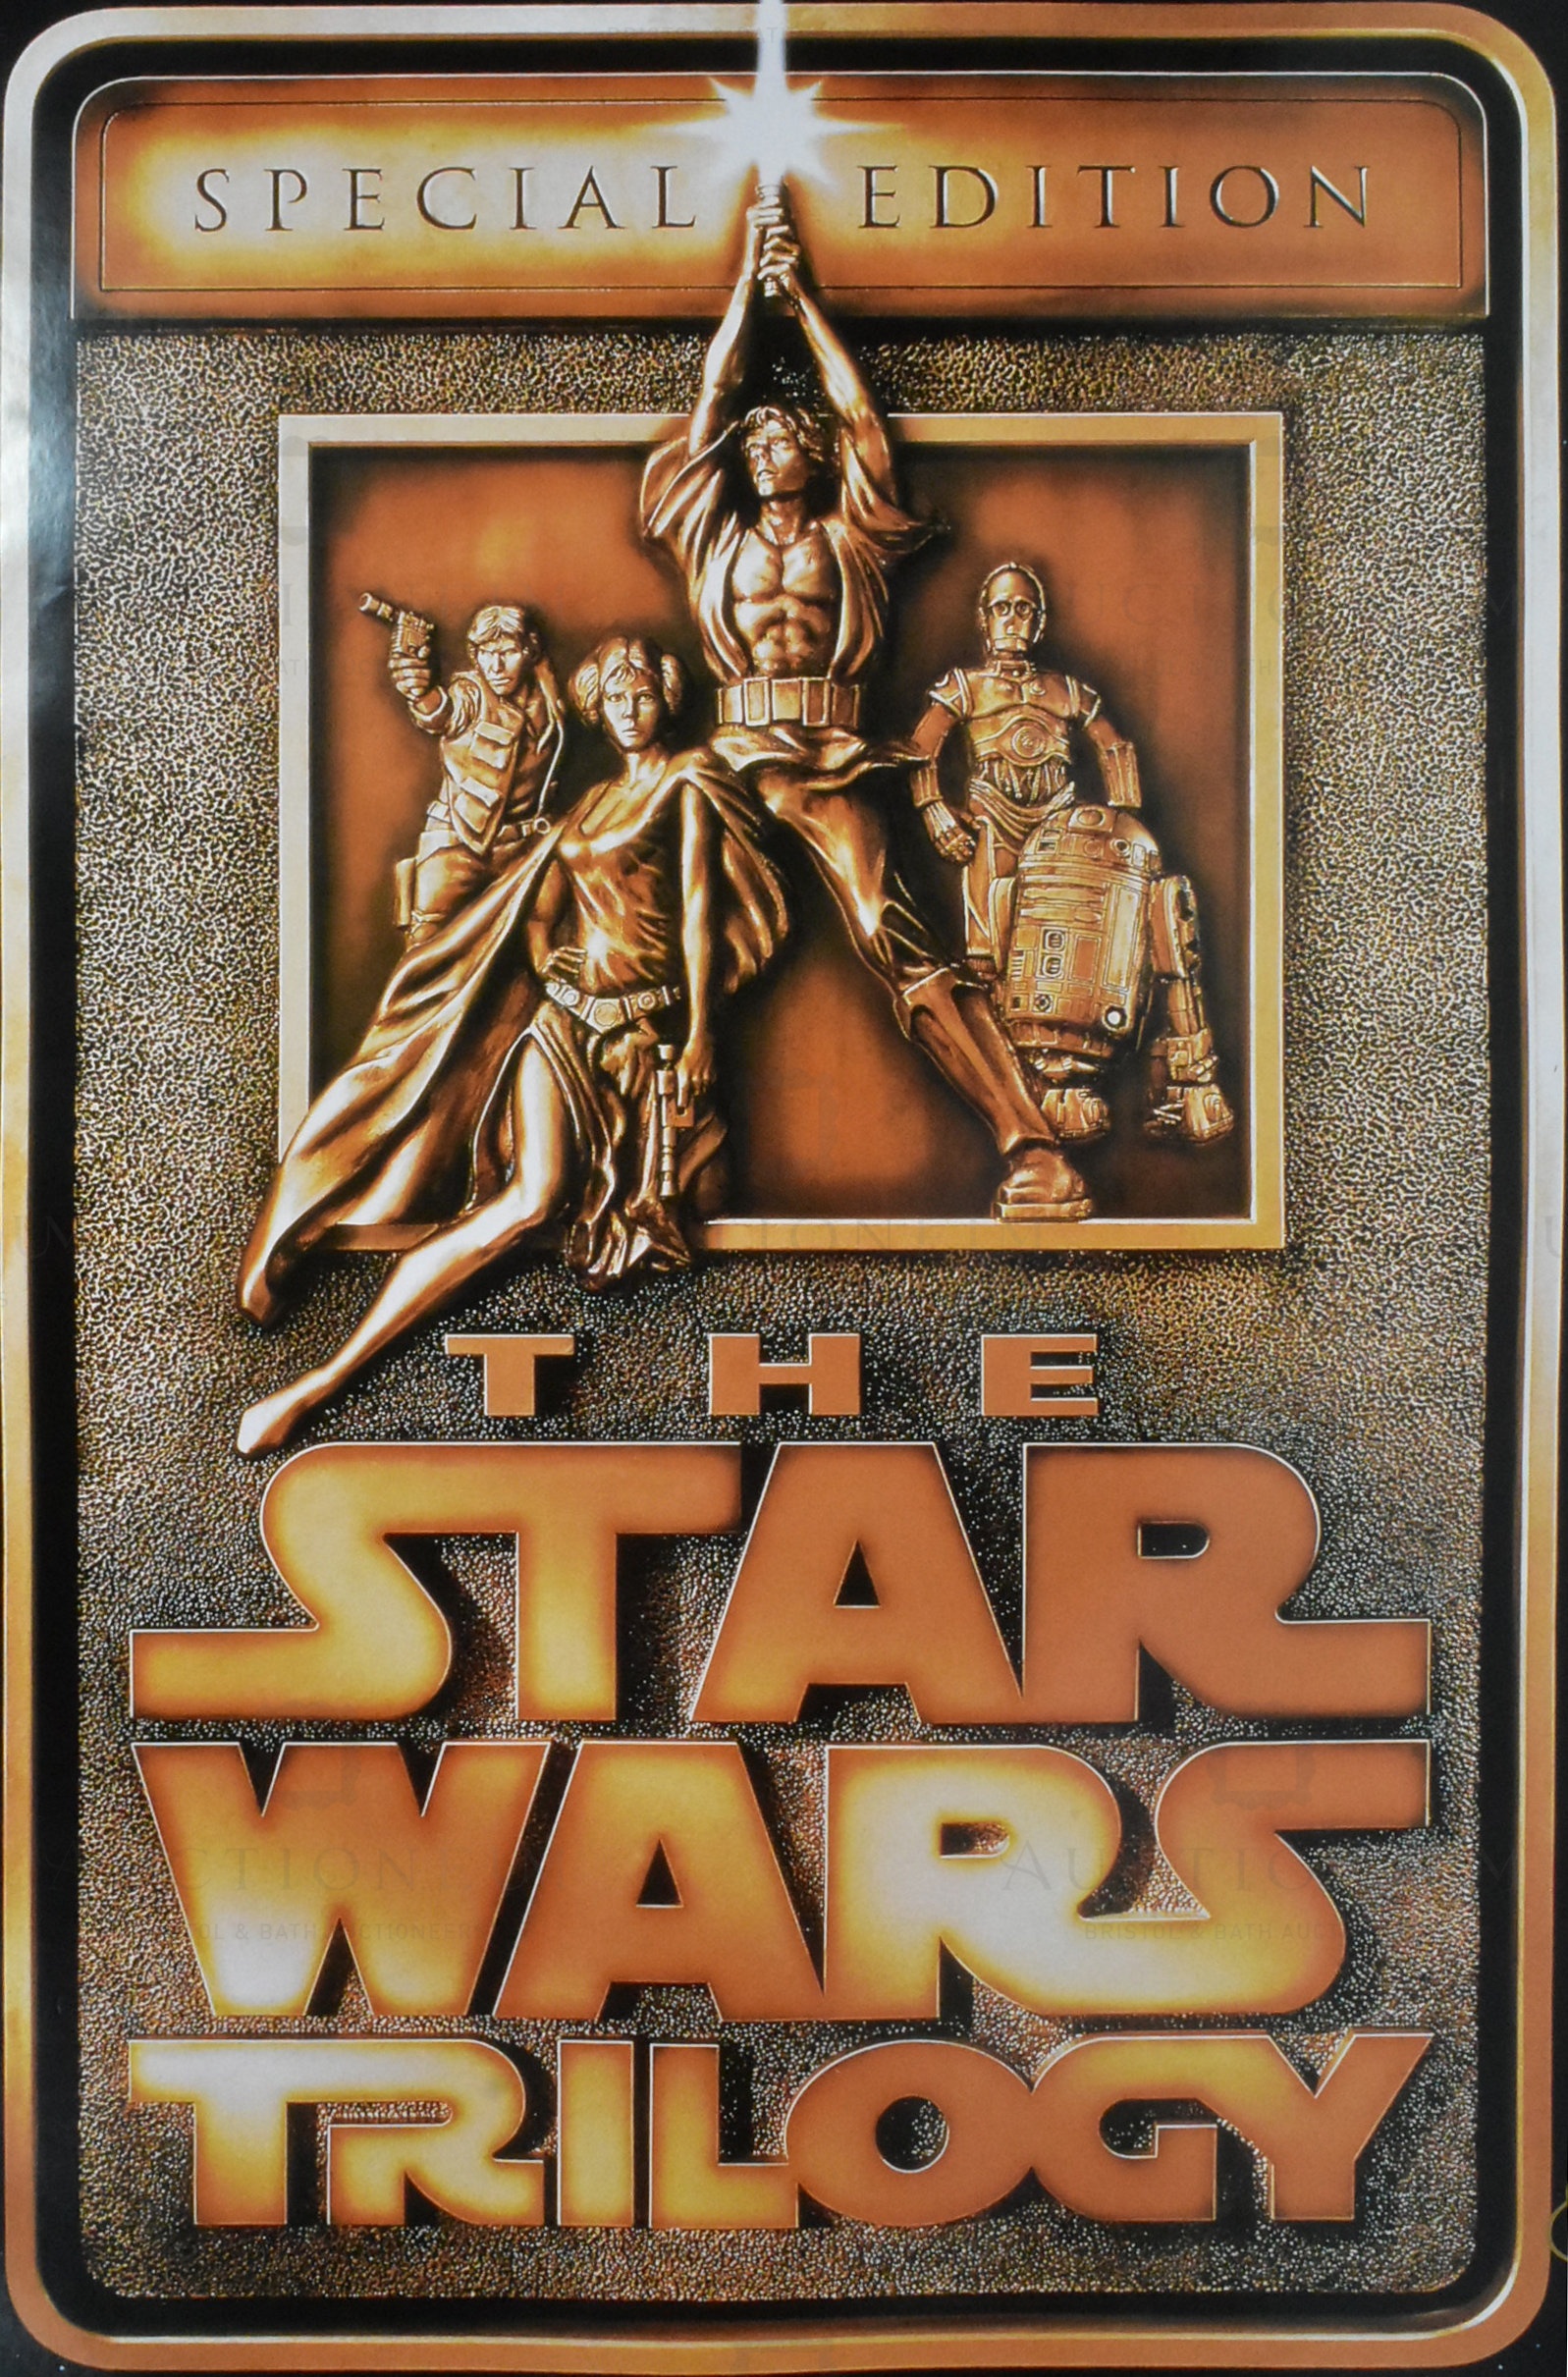 STAR WARS - SPECIAL EDITIONS - MAIN CAST SIGNED POSTER - PSA / DNA - Image 7 of 8